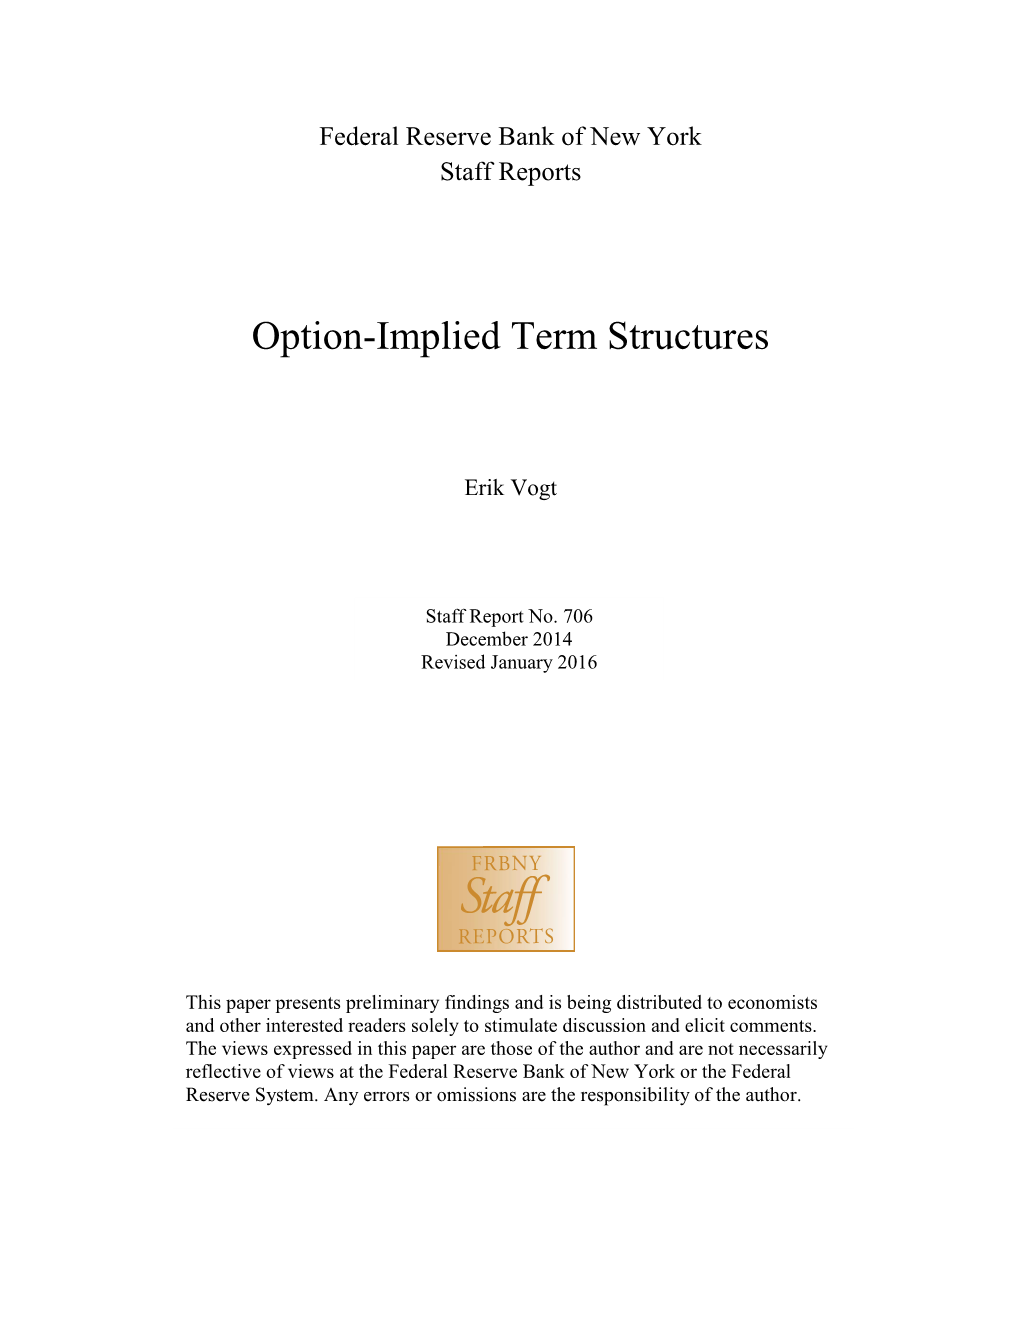 Option-Implied Term Structures